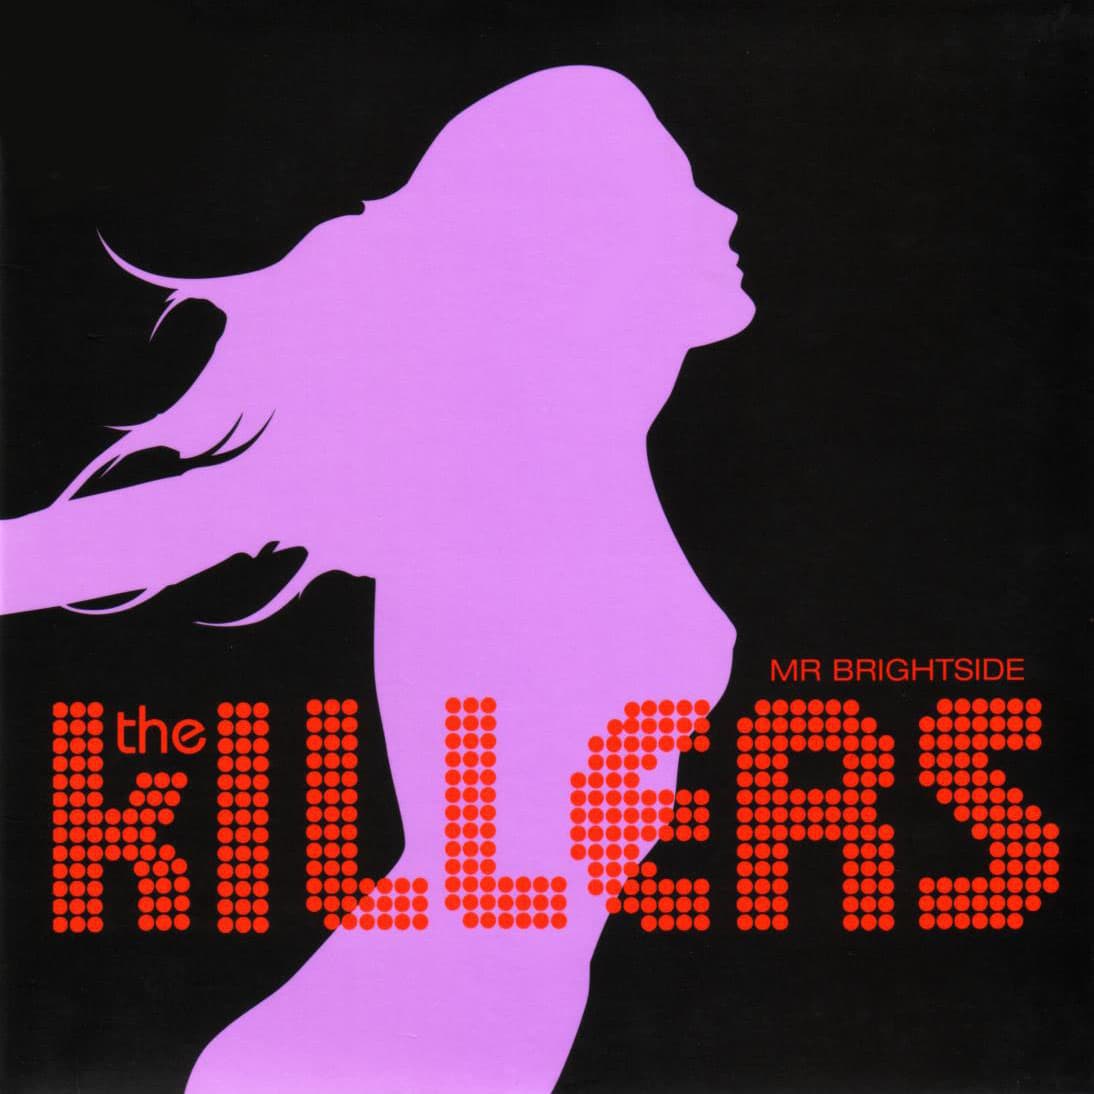 Killers обложка. The Killers - Mr. Brightside Жанр. The Killers альбомы. The Killers обложки альбомов. Somebody told me трек – the Killers.